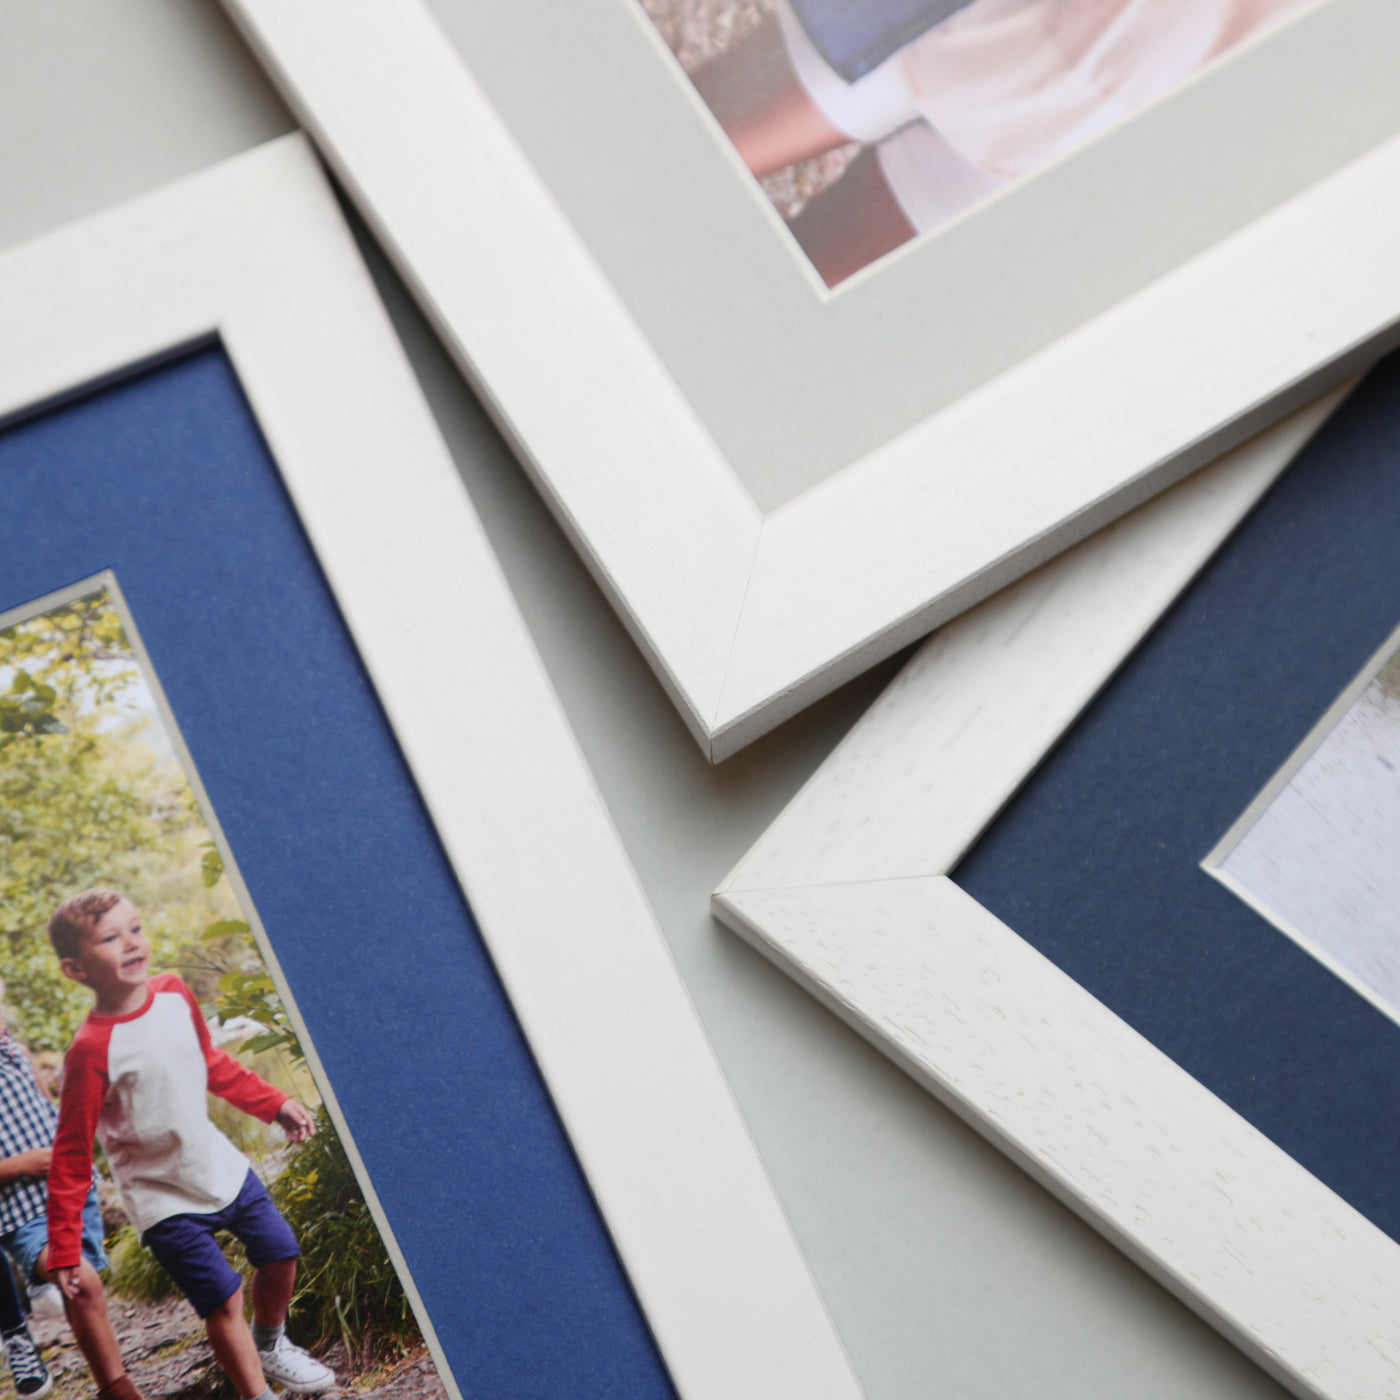 10x10 Classic White Picture Frame with a 6x6 Mount